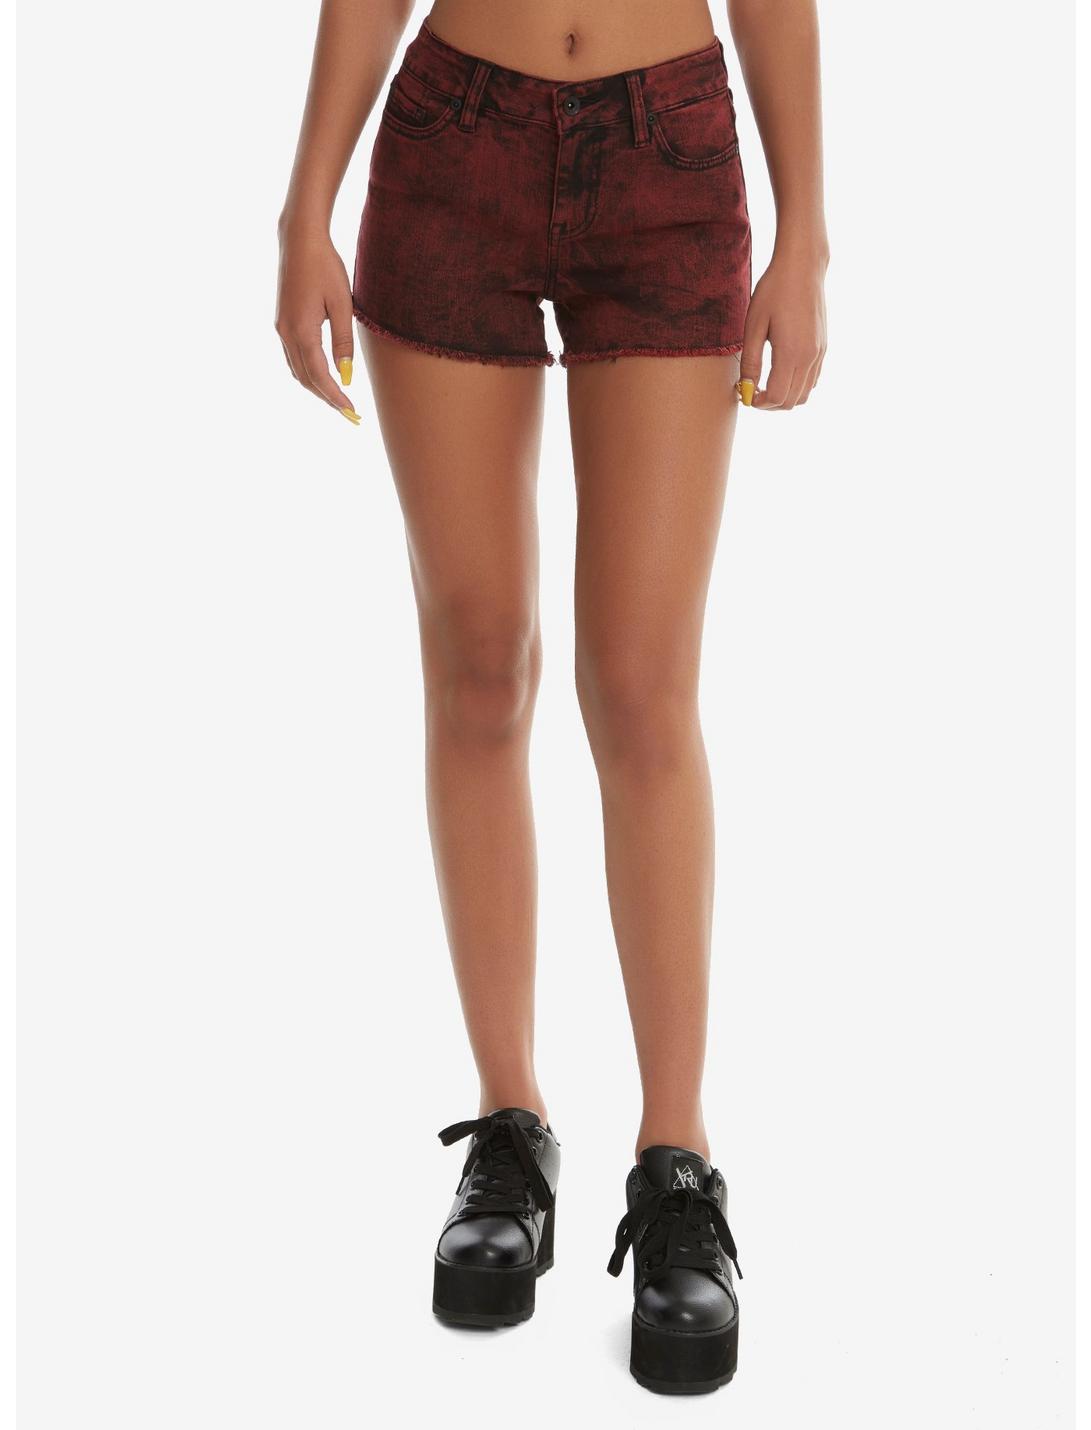 Blackheart Red Wash Low Rise Shorts, RED, hi-res